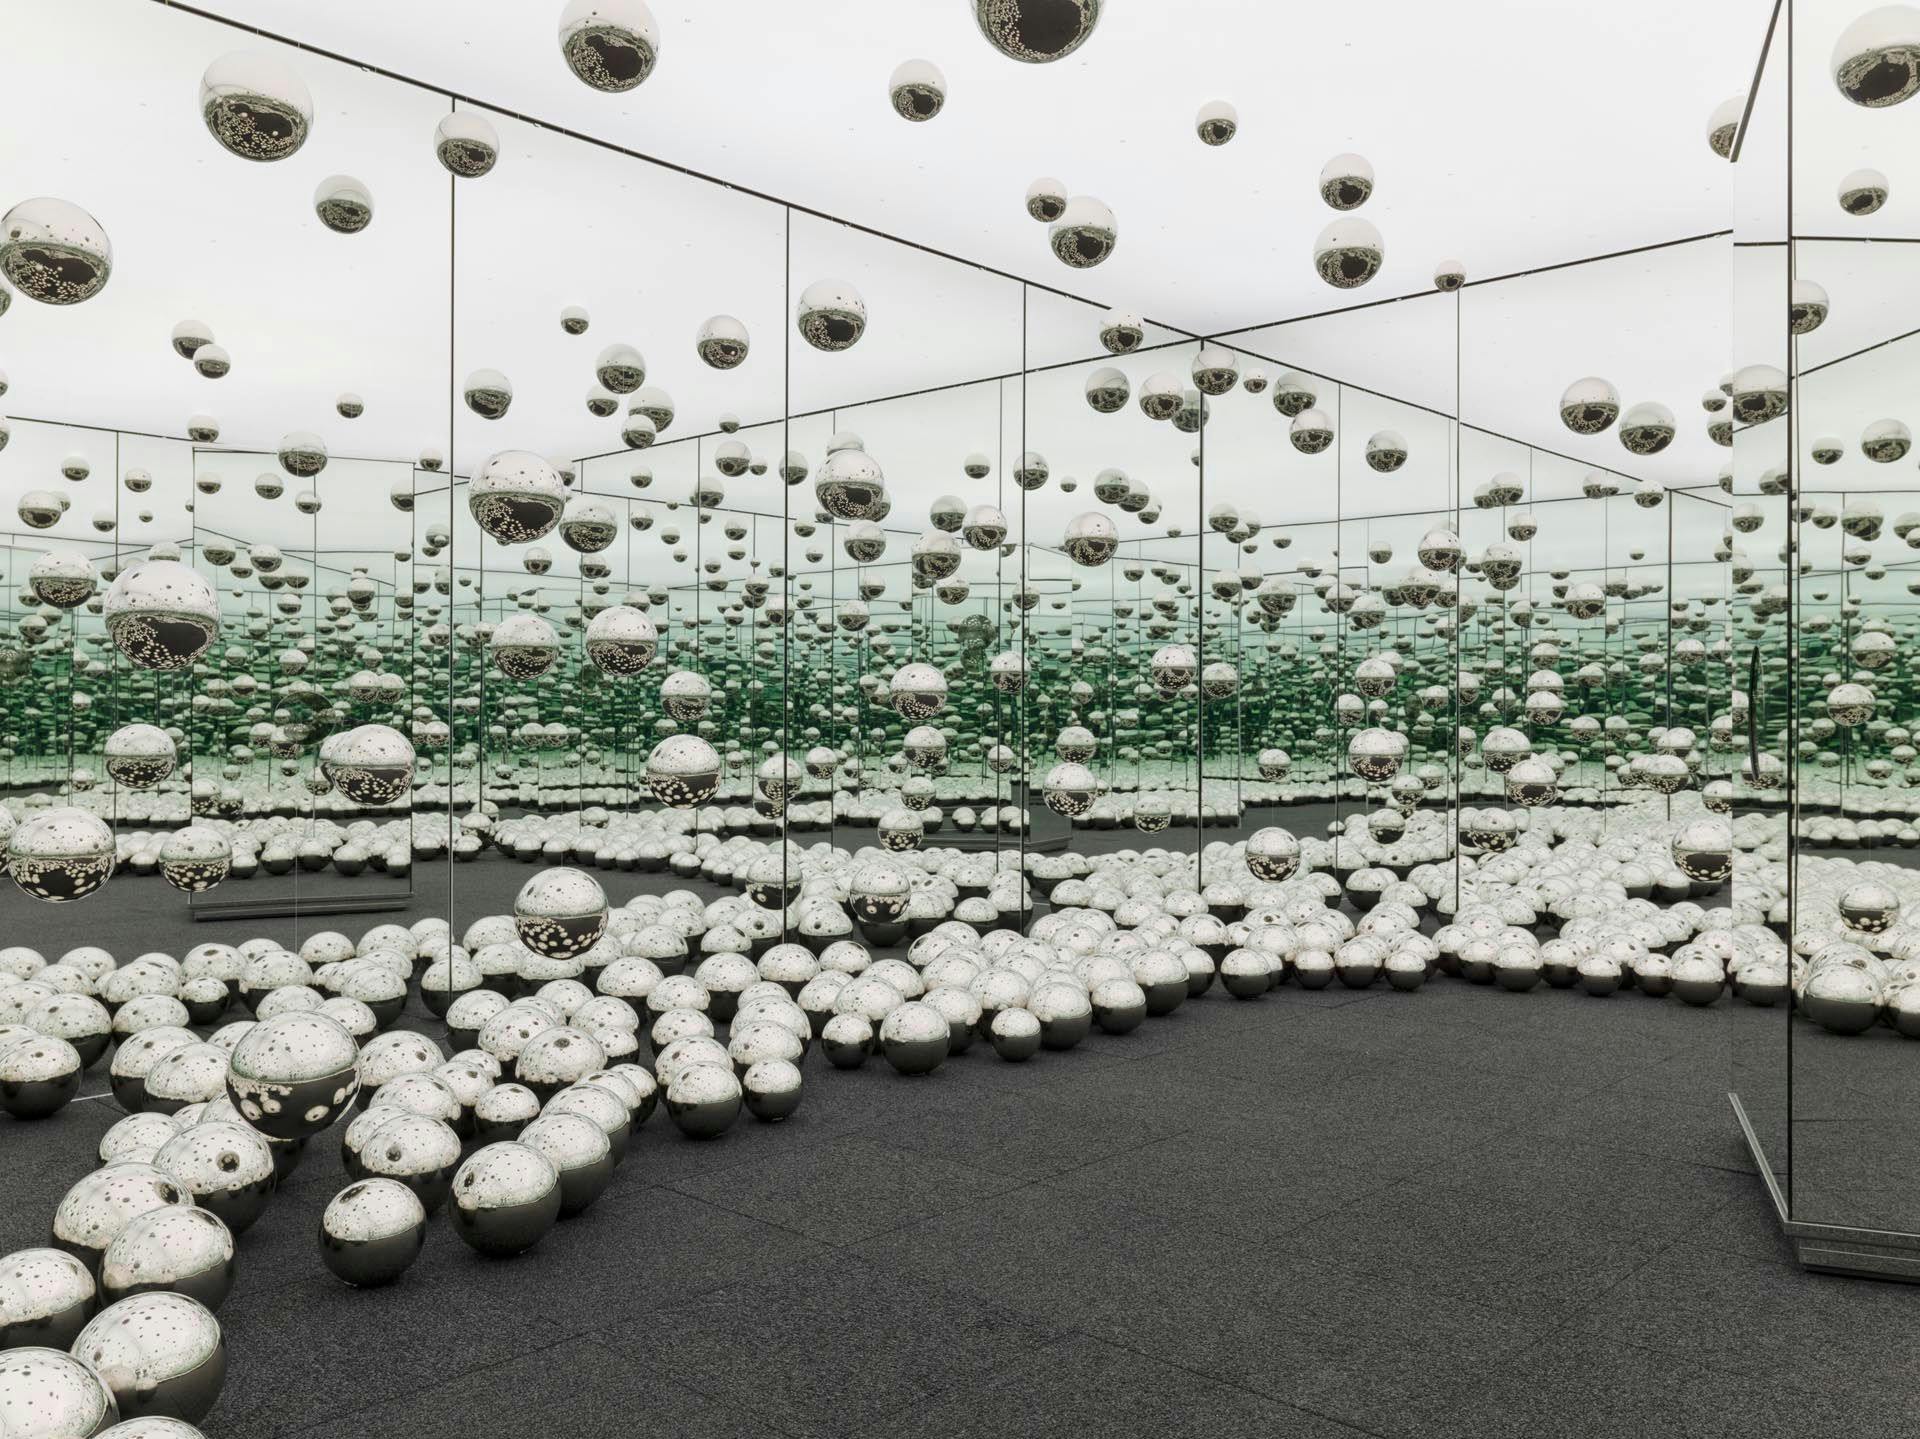 A view of an experiential installation by Yayoi Kusama, comprised of mirrors, wood, LED lighting system, metal, steel balls, and carpeting, titled Infinity Mirrored Room - Let's Survive Forever, dated 2017.